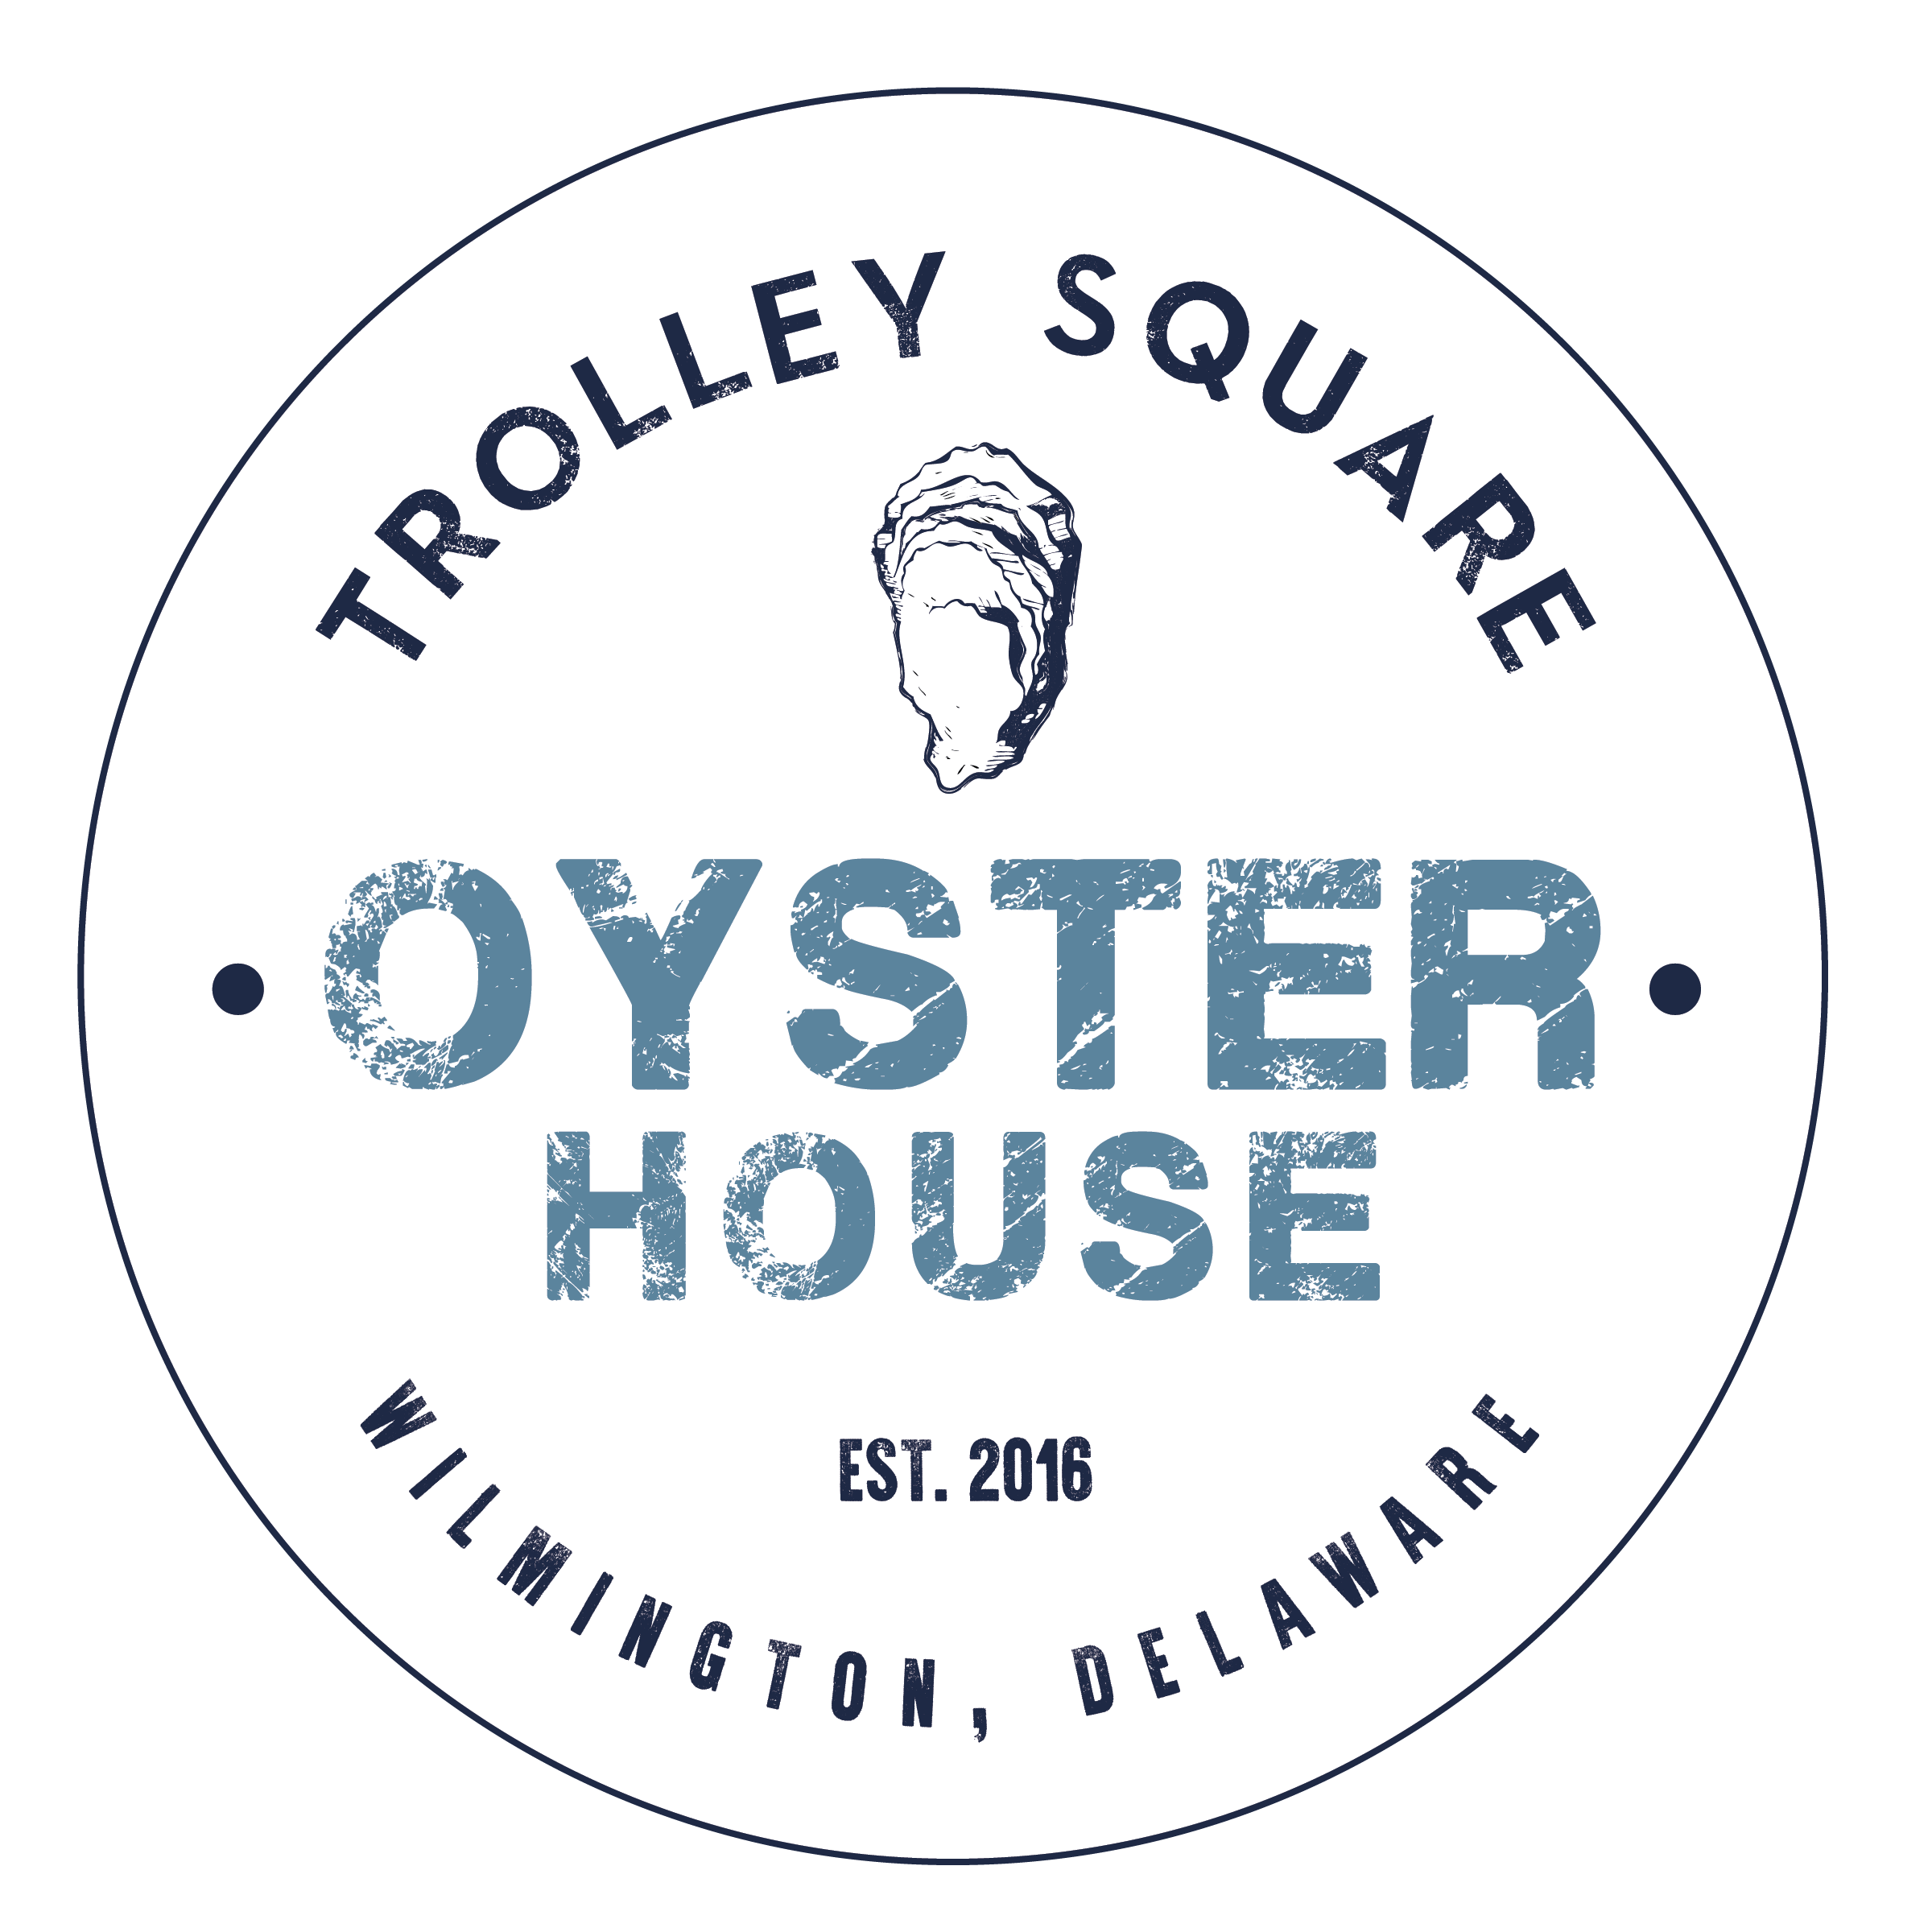 House Circle Logo - Home - Trolley Square Oyster House